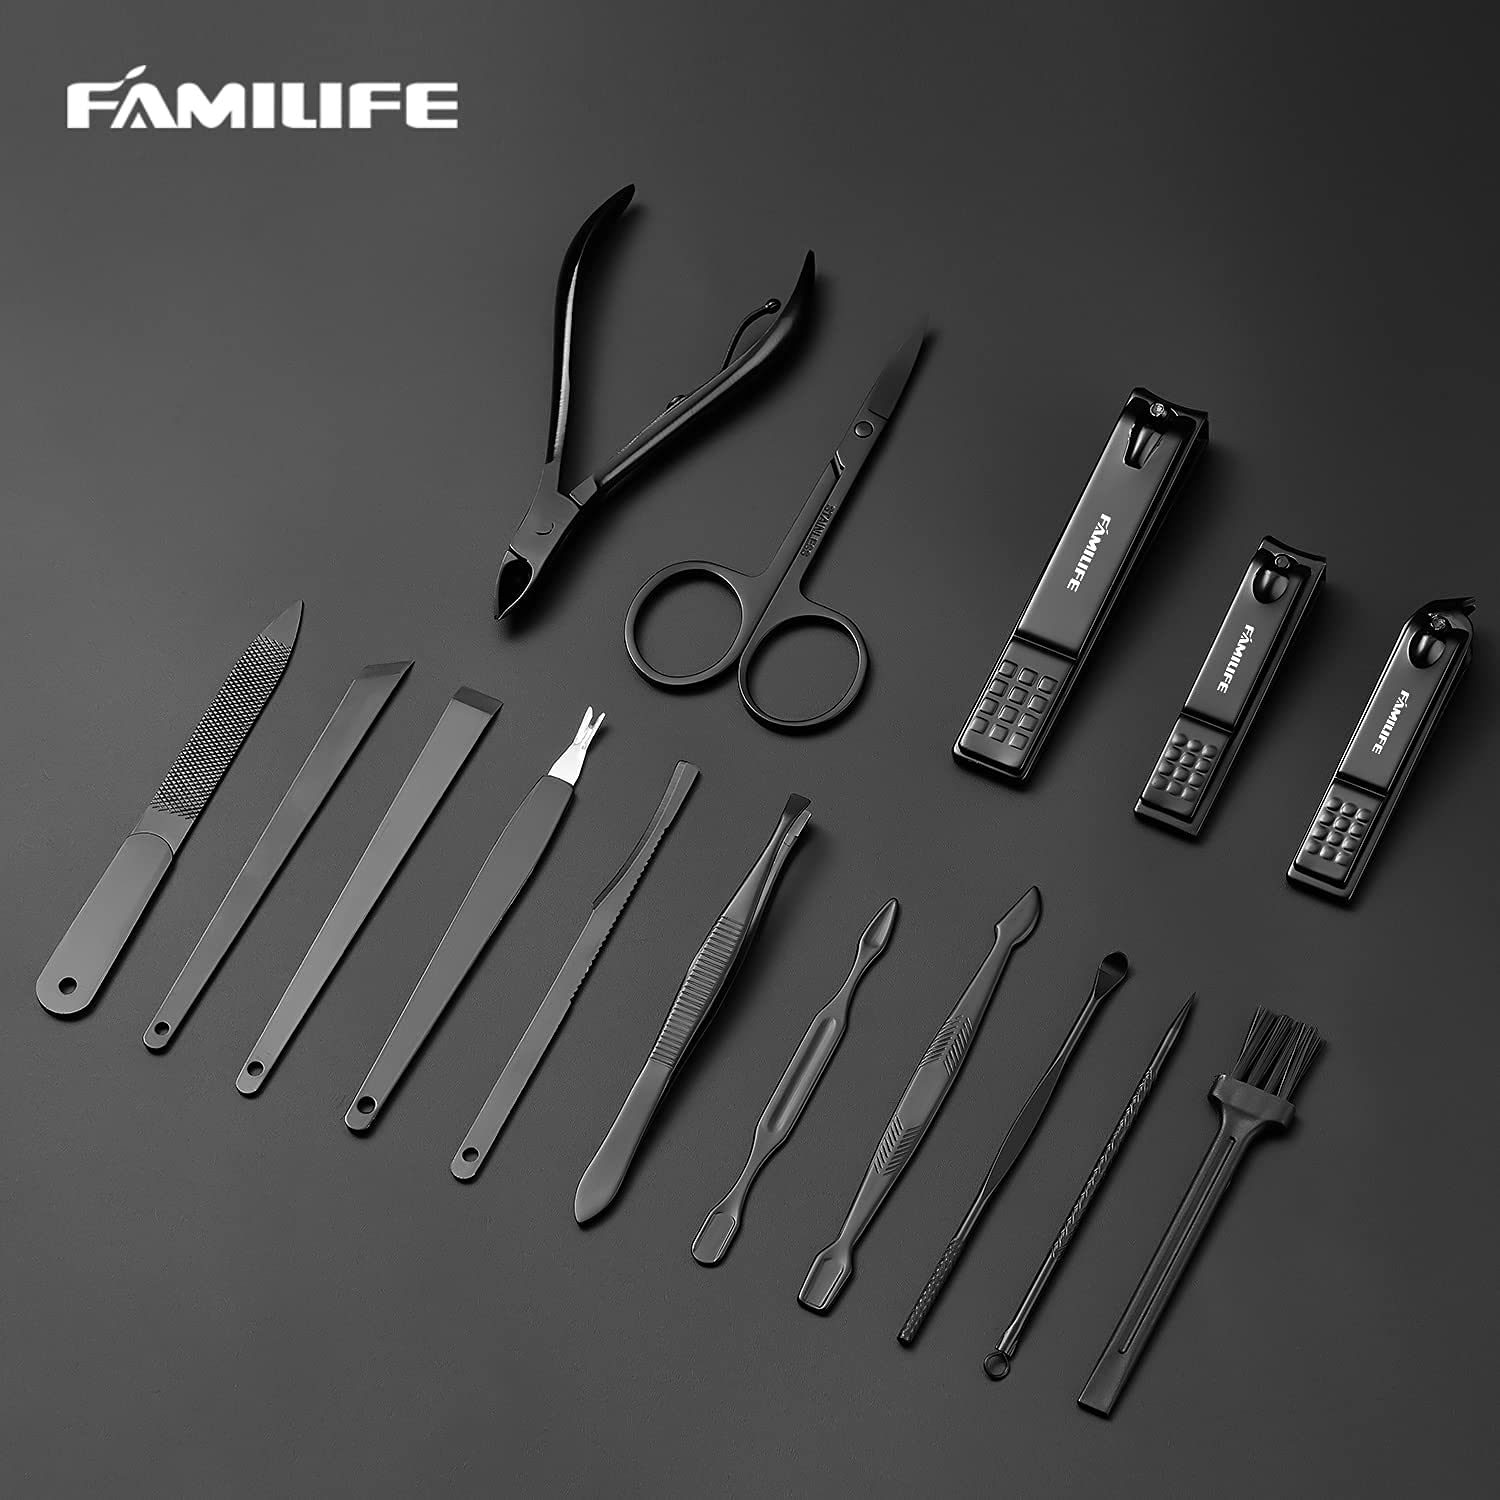 FAMILIFE Manicure Set Professional Nail Clippers Pedicure Care Tools- Portable Stainless Steel Women Grooming Kit for Travel or Home, 16 pcs - image 2 of 8